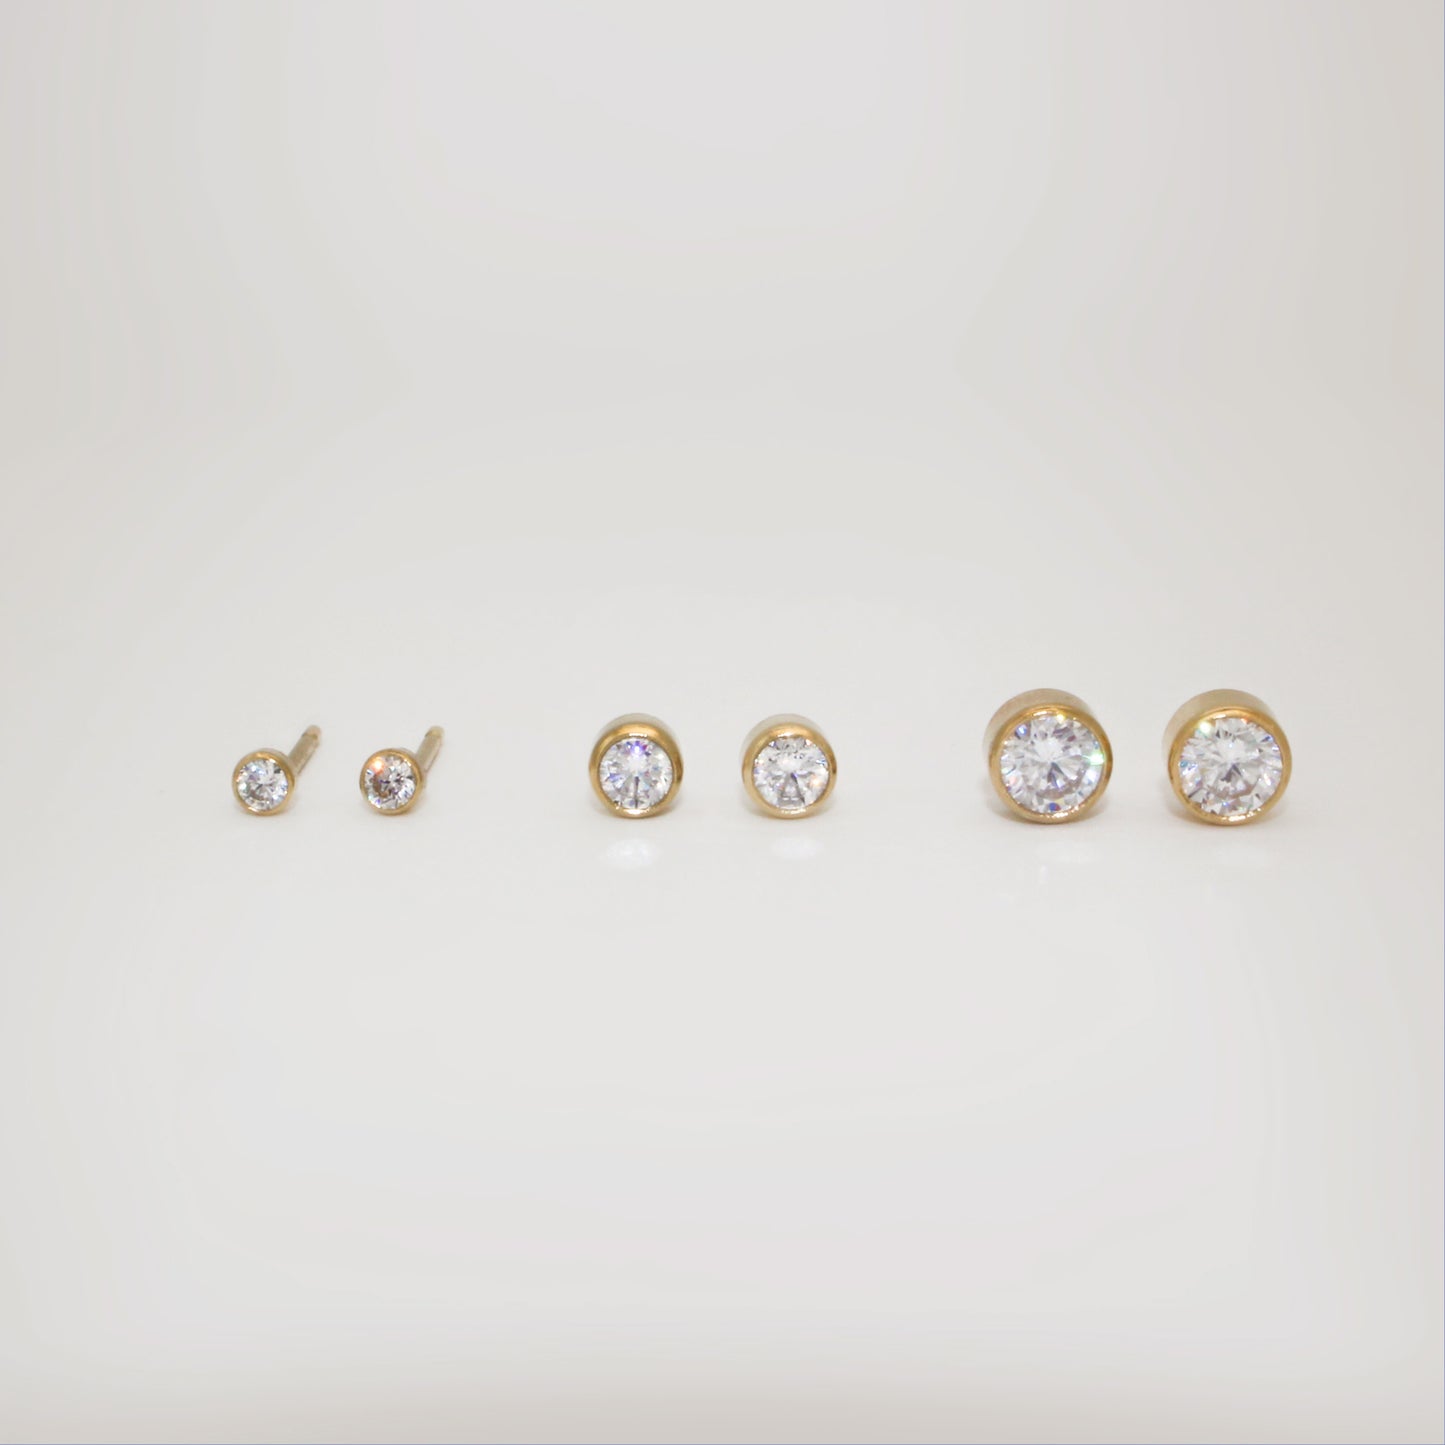 Dainty 14kt Gold Filled Round Zirconia ∙ Studs Earrings